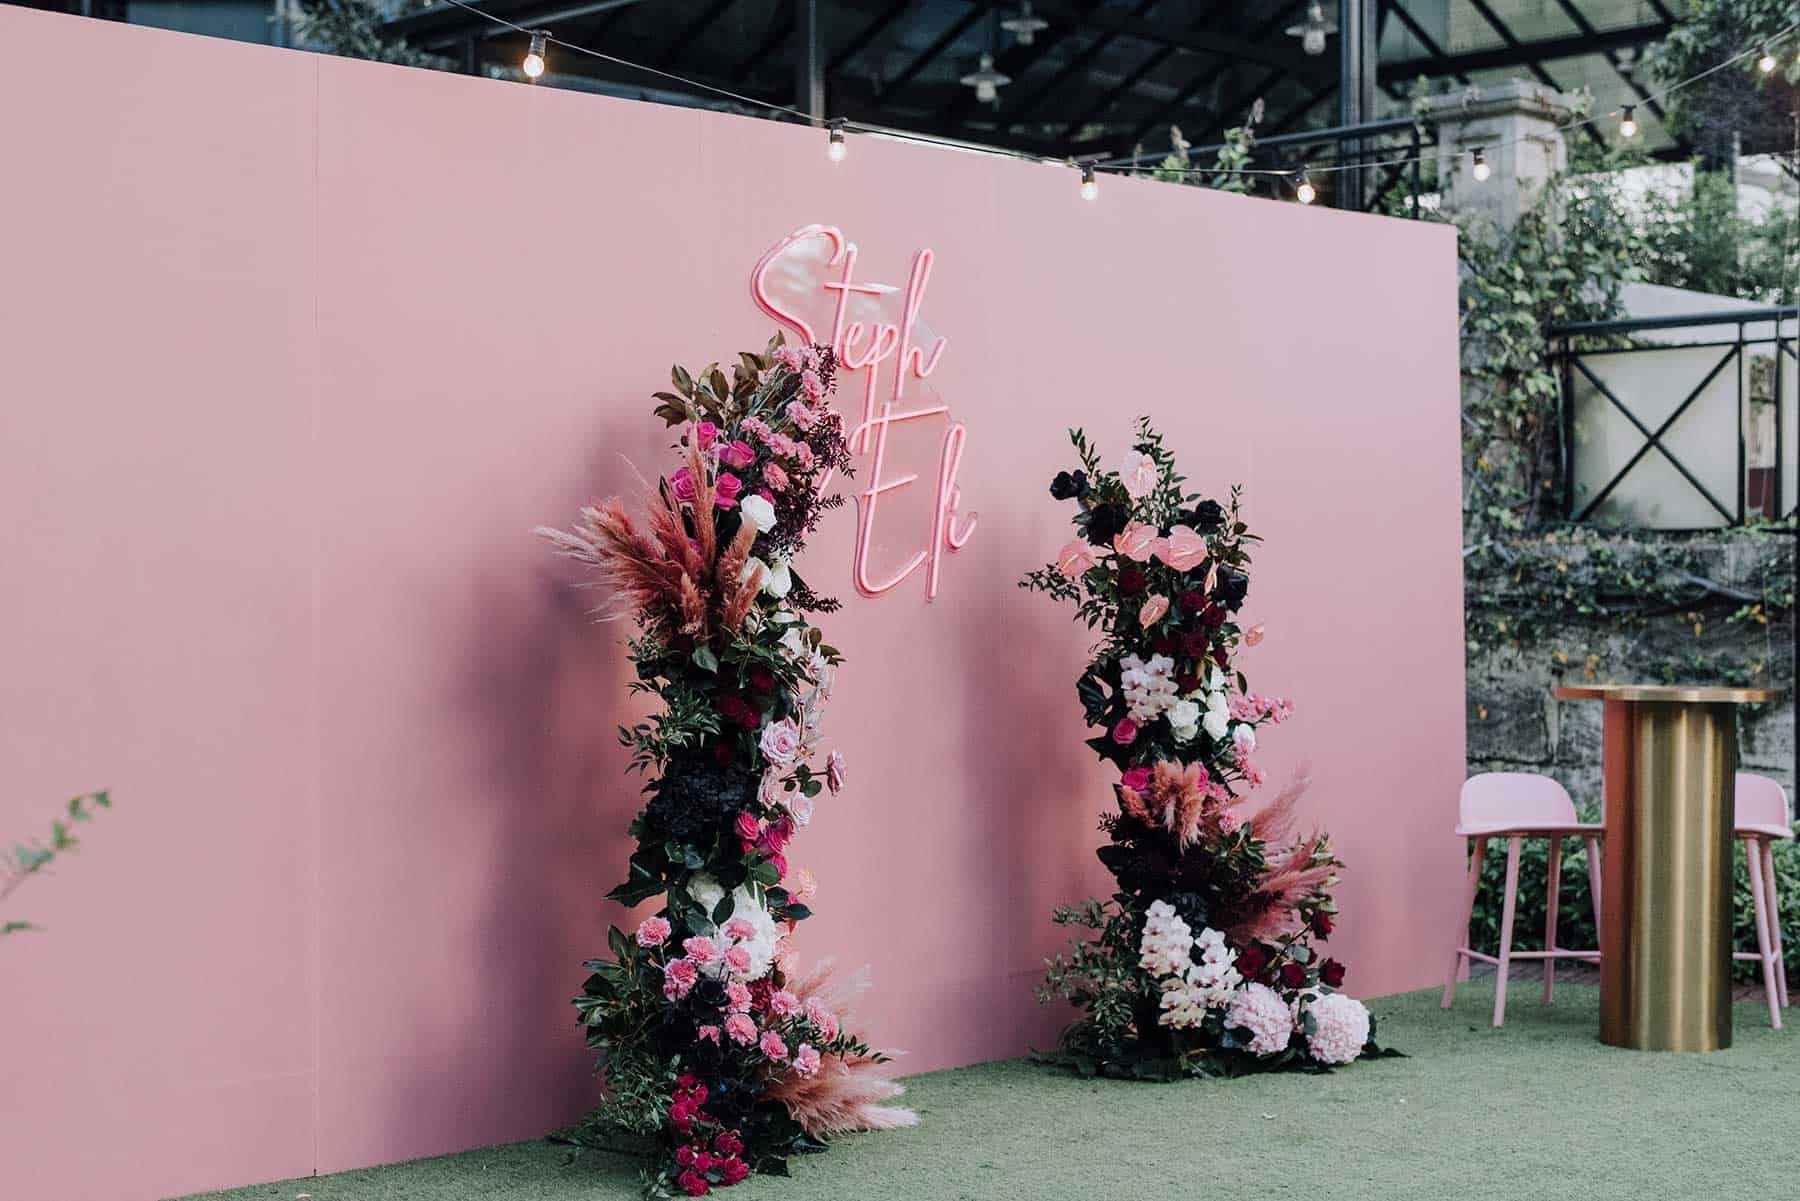 floral wedding arbour against pink wall with neon sign